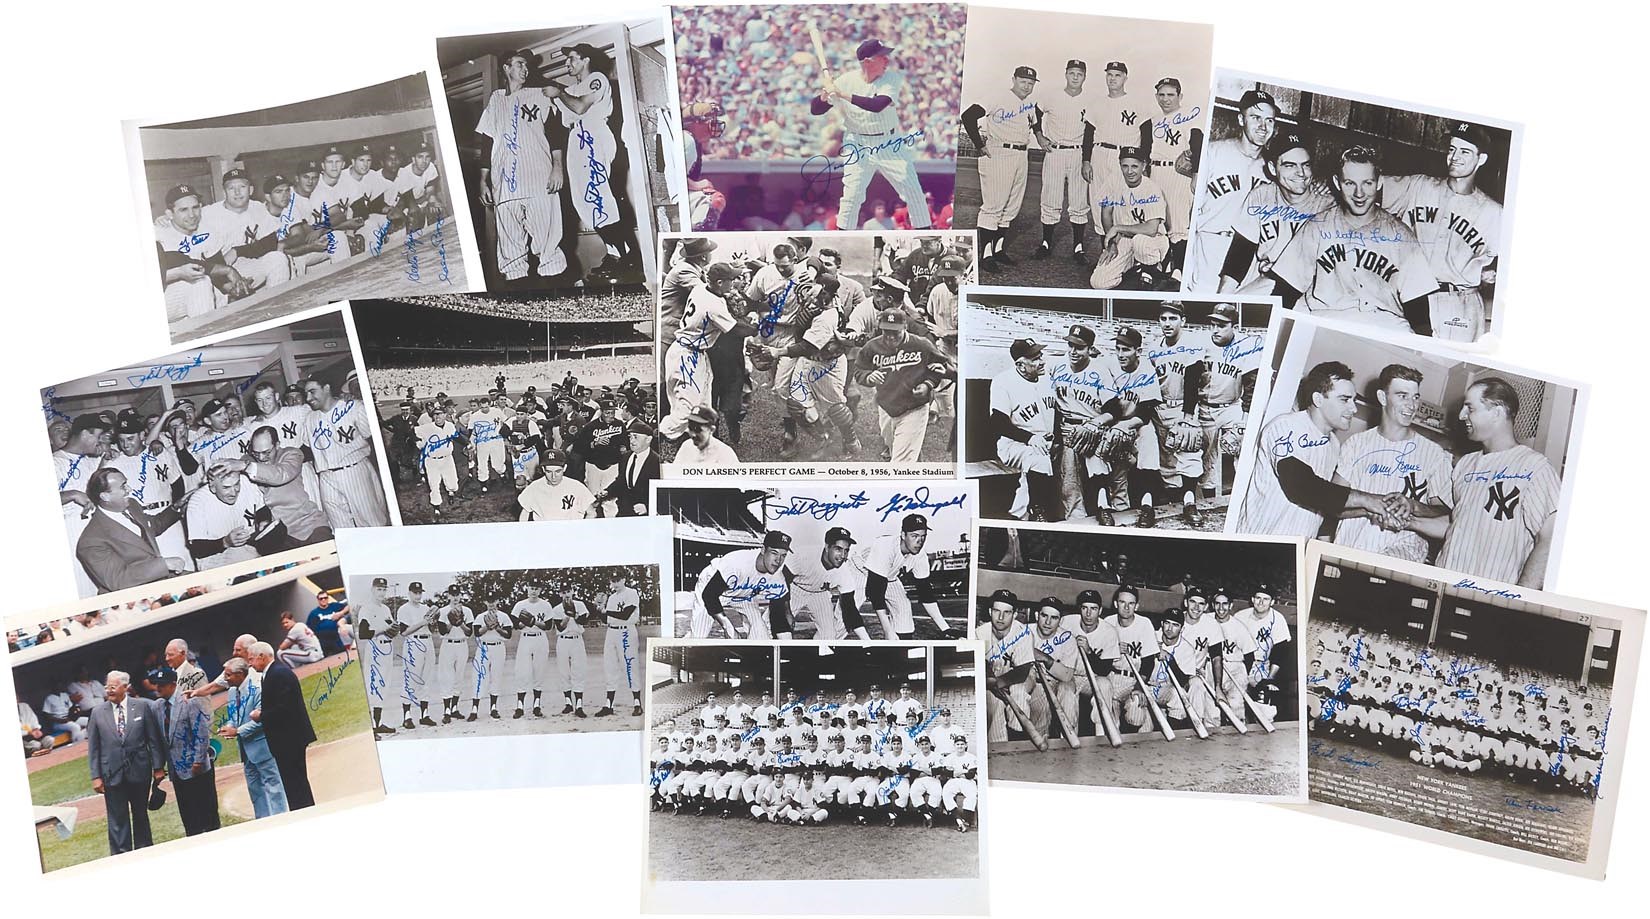 NY Yankees, Giants & Mets - Massive New York Yankees Signed Photograph Archive (1,500+)